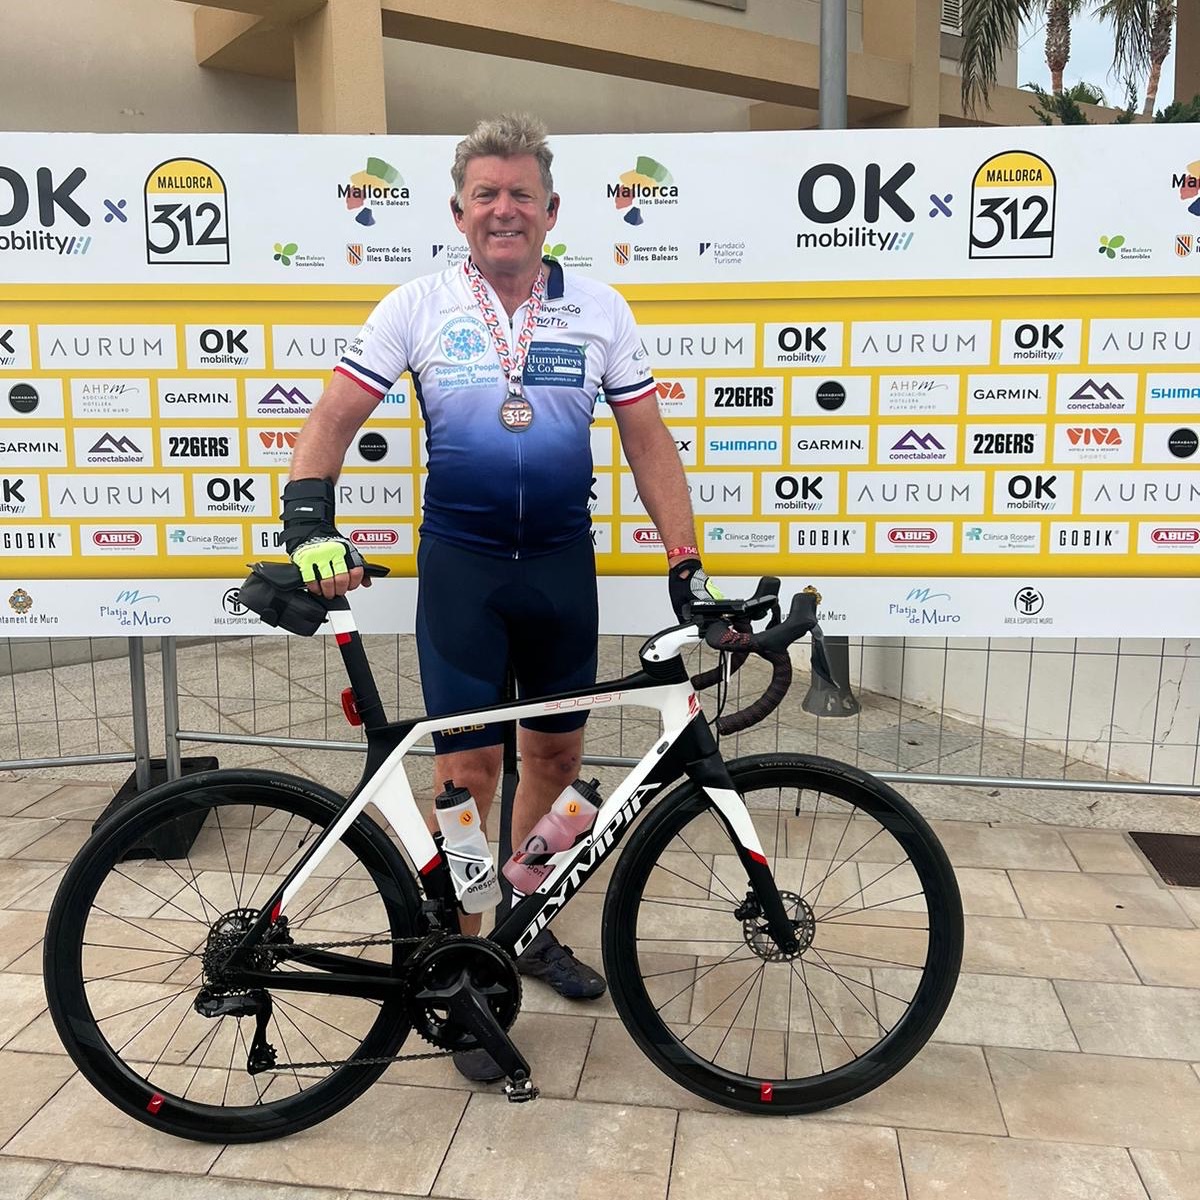 Over the last month, our board of trustees chair has been training hard for the Mallorca 312. This time last week, Nick was on his way to cycling further in one day than he had ever done before. Thank you so much to everyone that has donated and supported him. Well done, Nick 💙